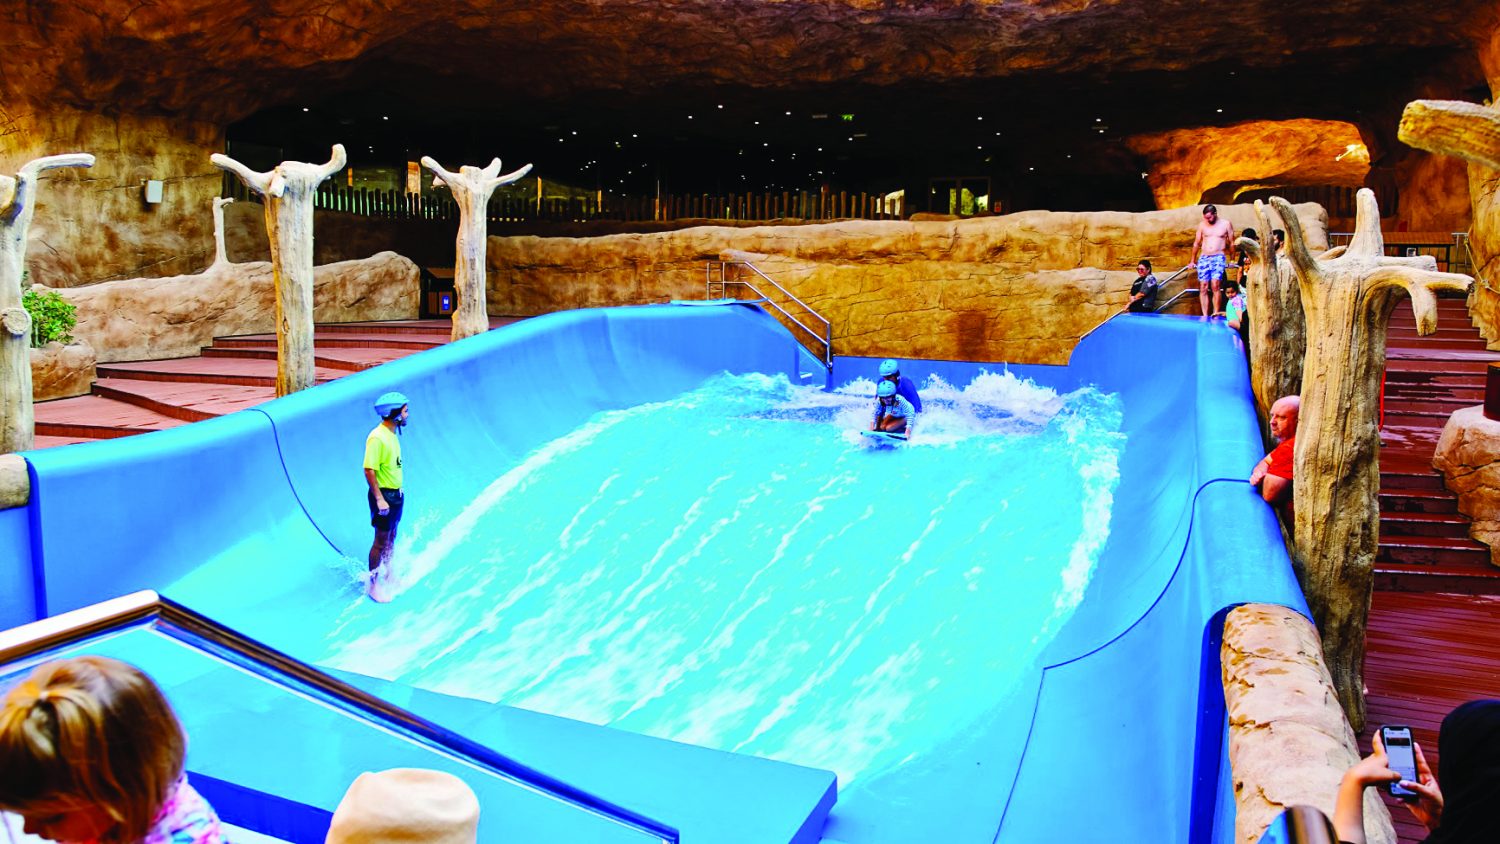 Ticket prices and visiting dates at Desert Falls Theme Park